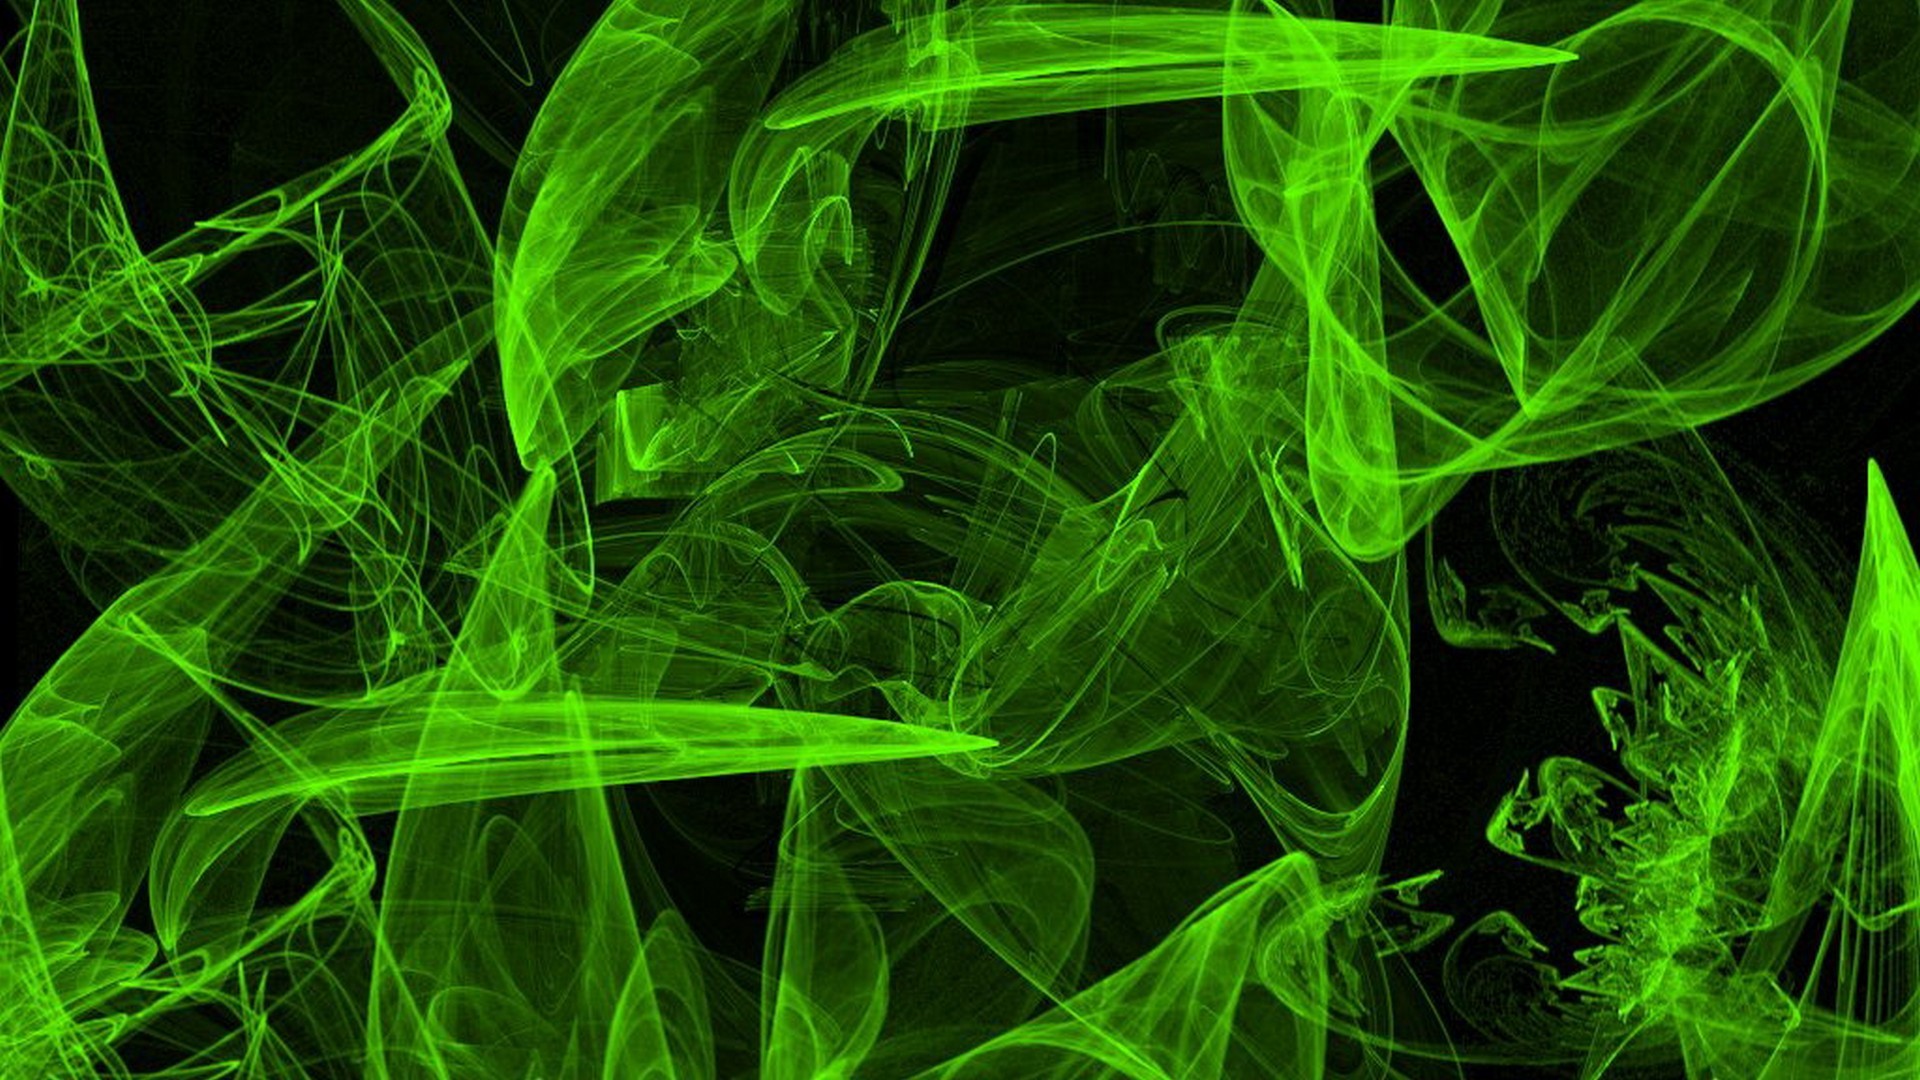 1920x1080 Neon Green Background Wallpaper HD with image resolution  pixel.  You can make this wallpaper